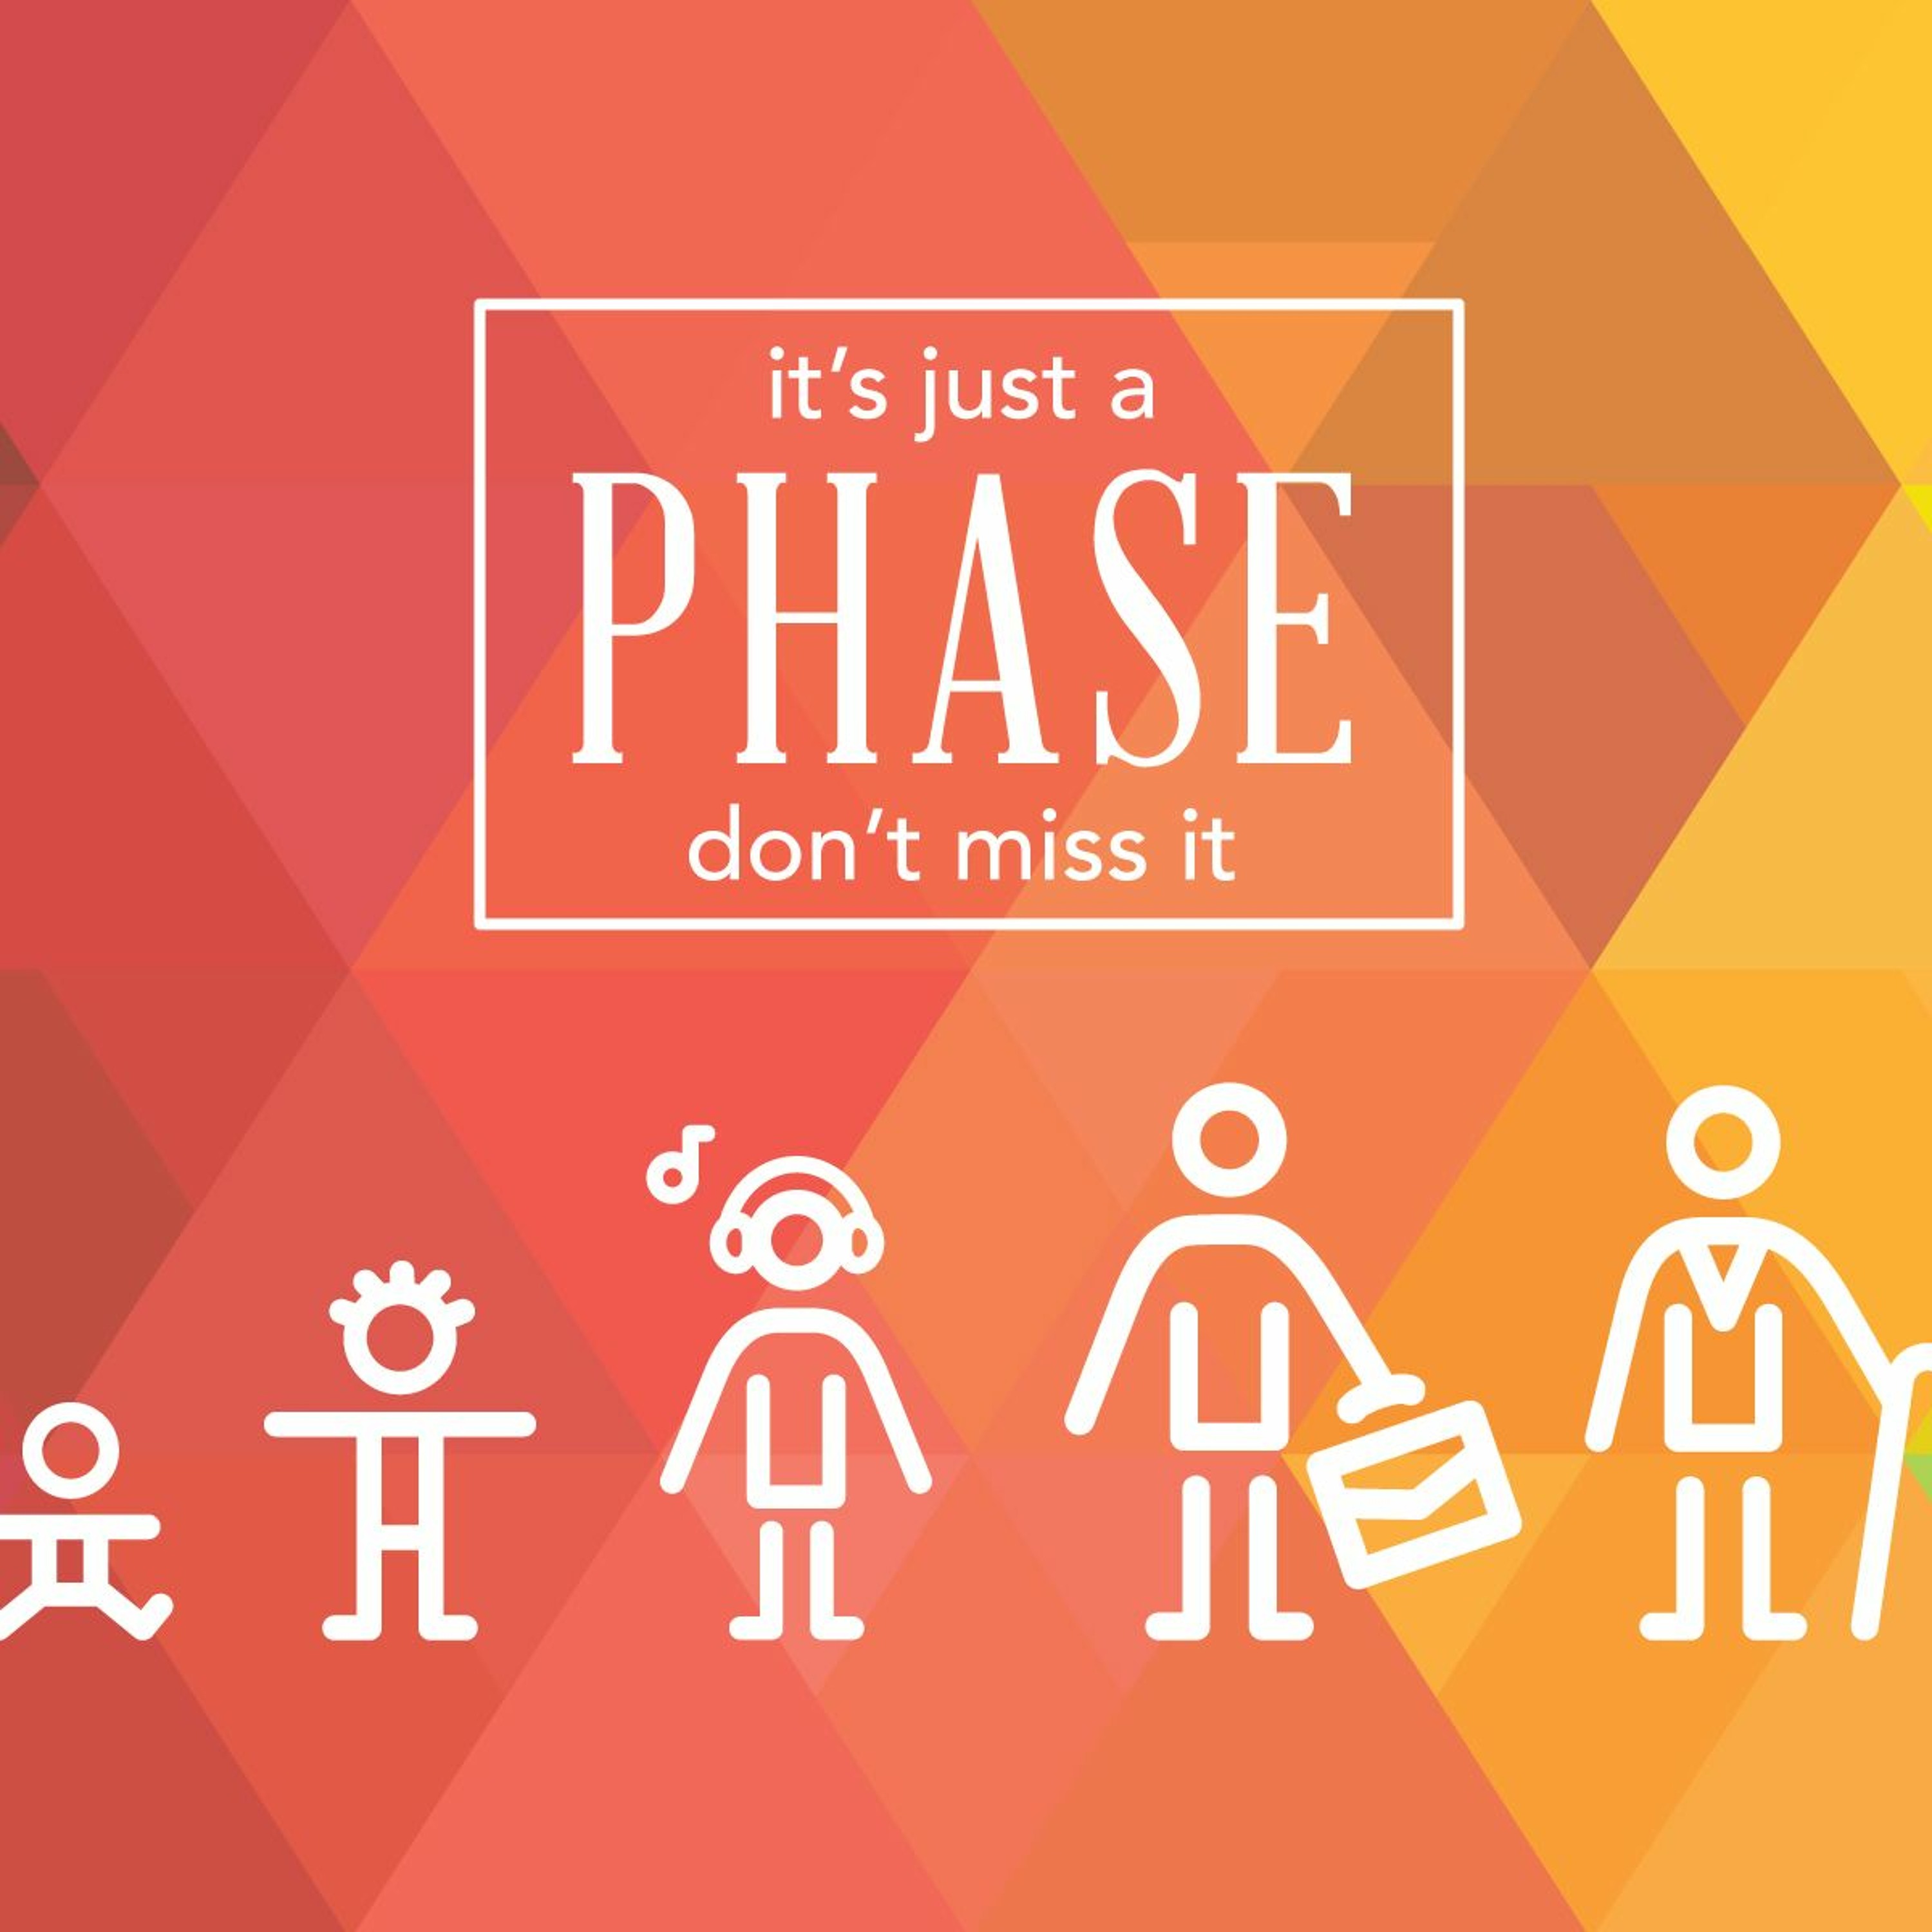 Failure and disappointment | It's Just a Phase | Ethan Magness